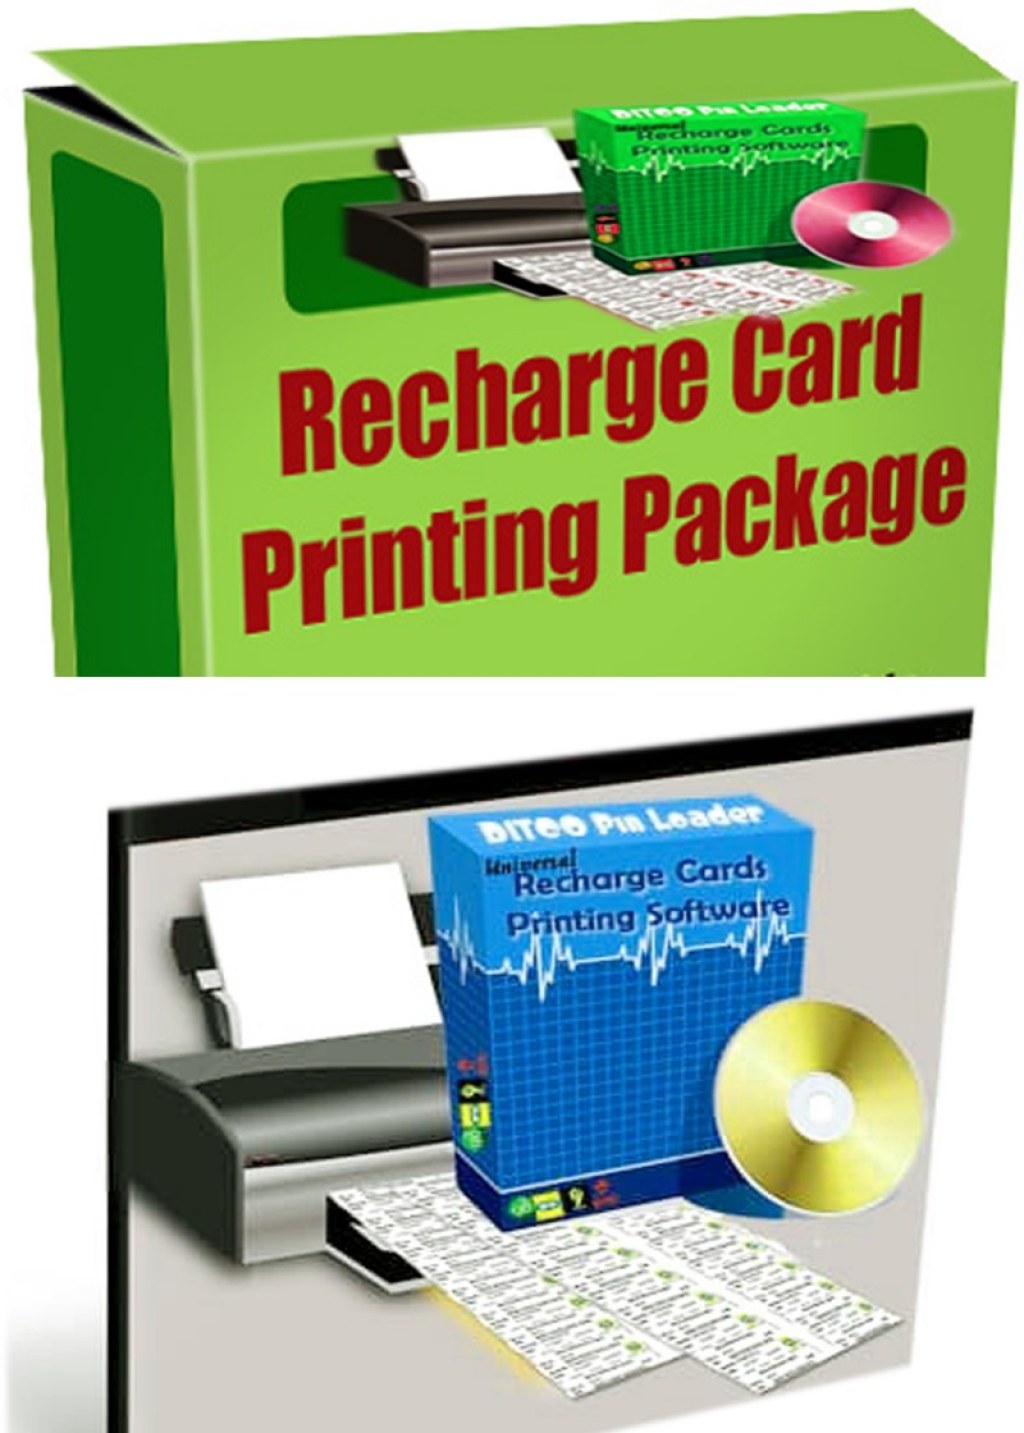 buy how to start recharge card printing business in nigeria by